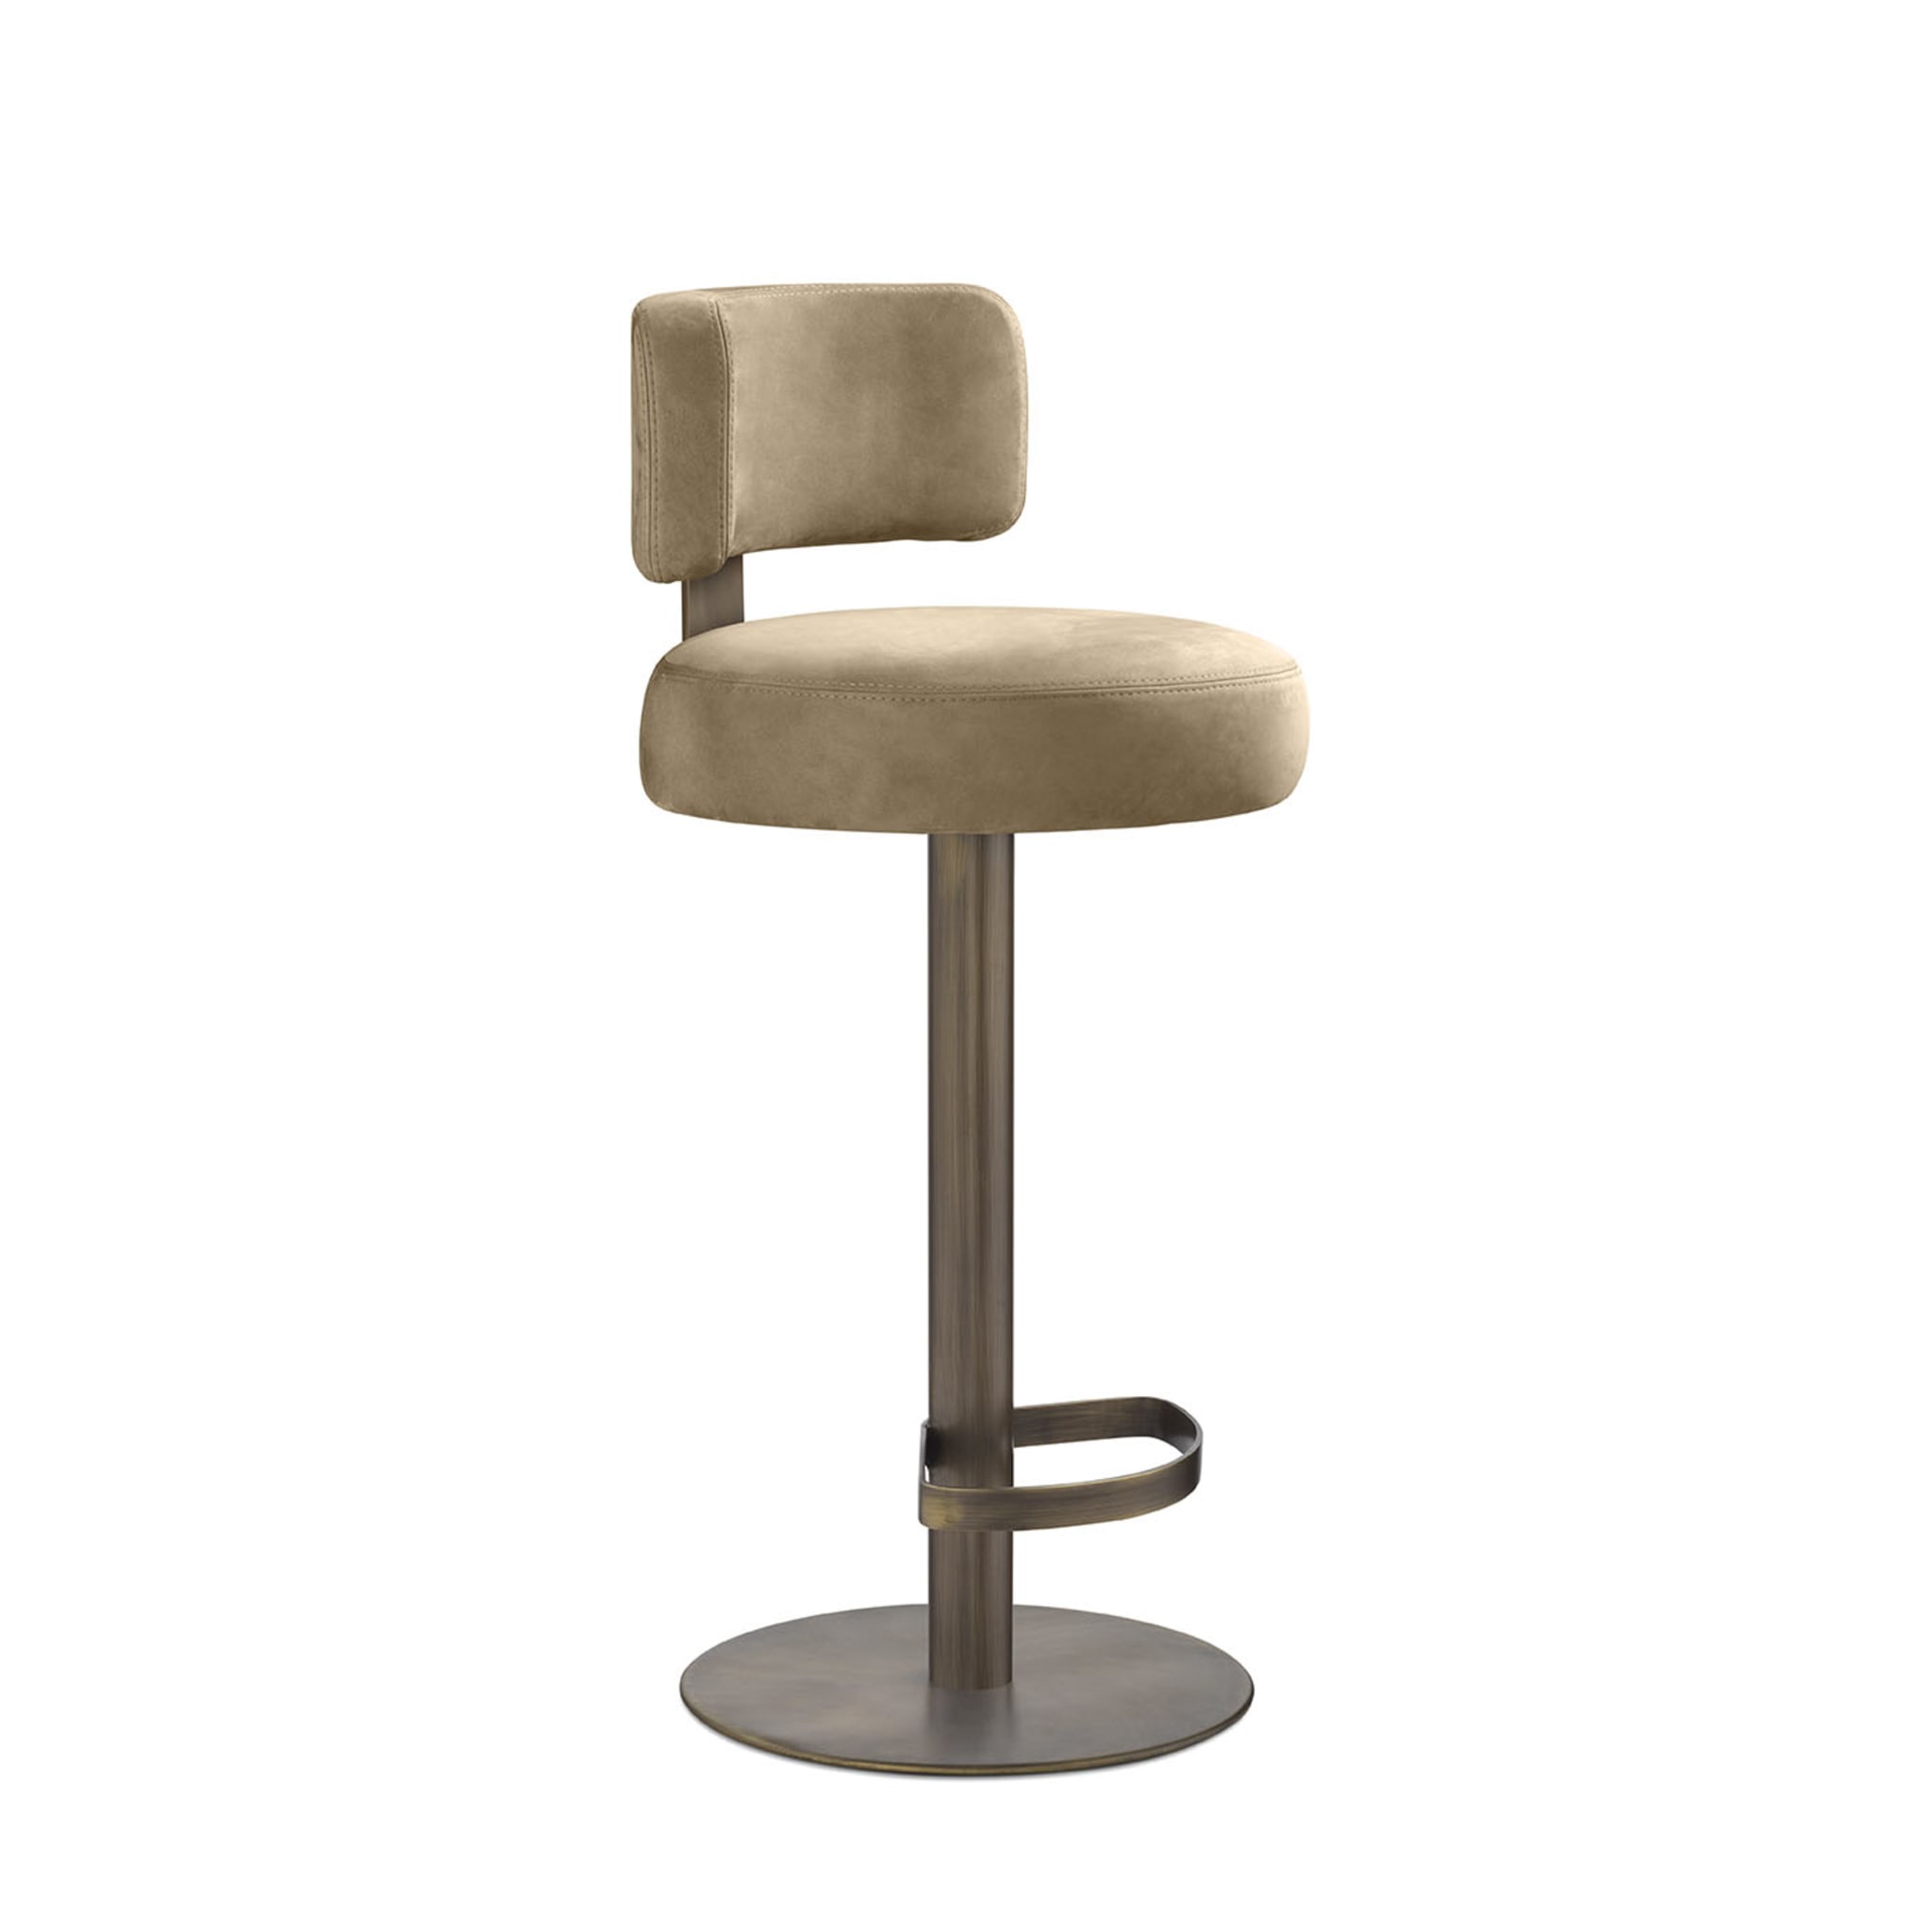 Alfred fixed Bar Stool - Alternative view 1